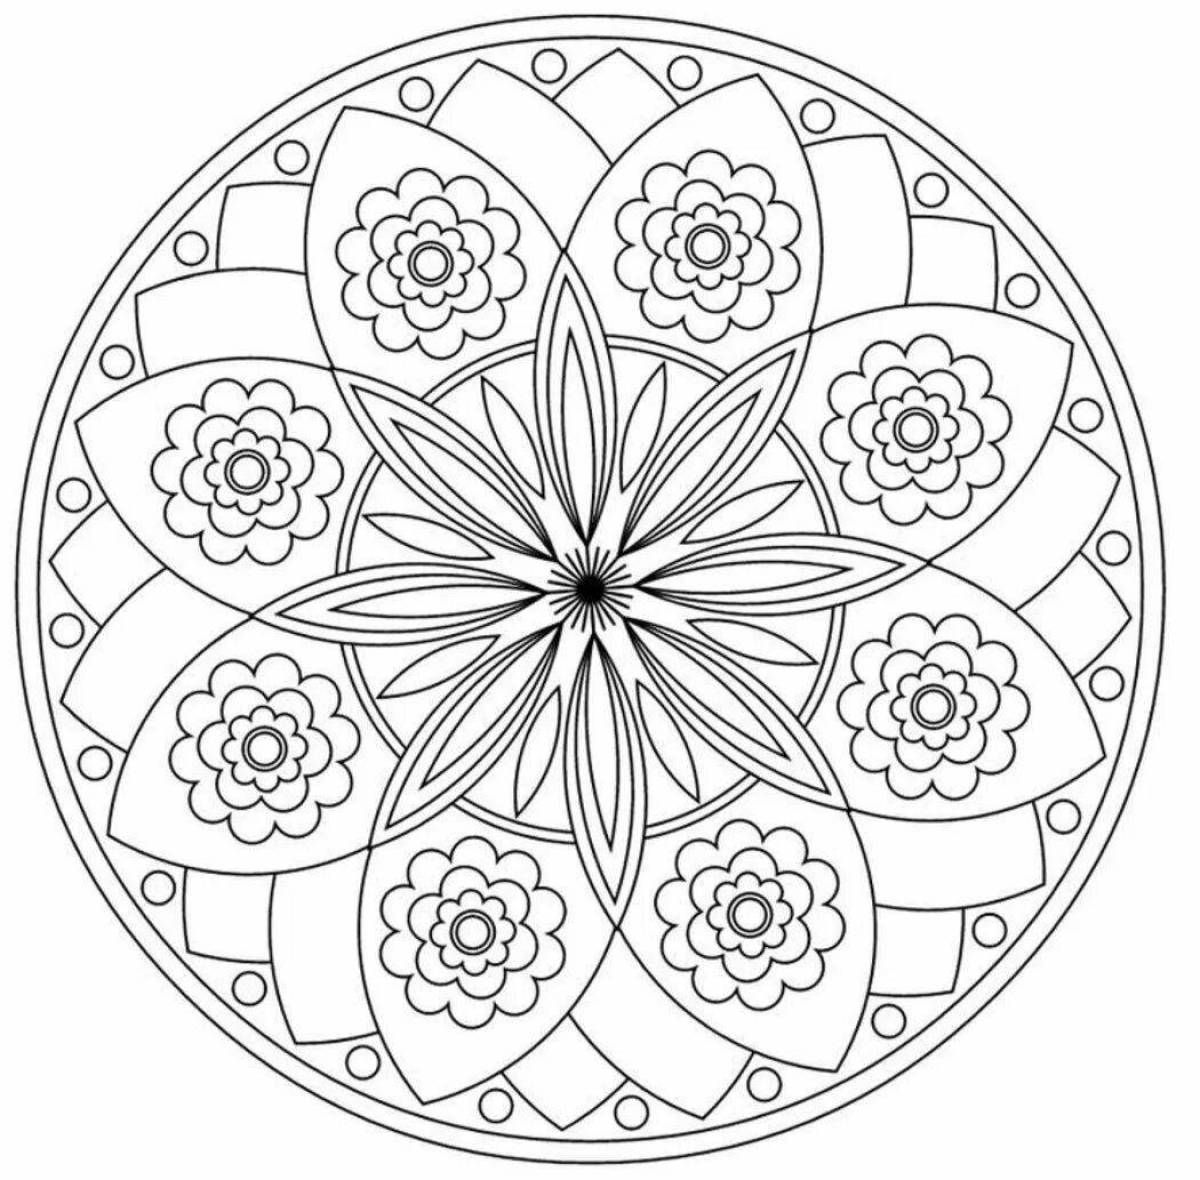 Coloring page with intricate circular pattern